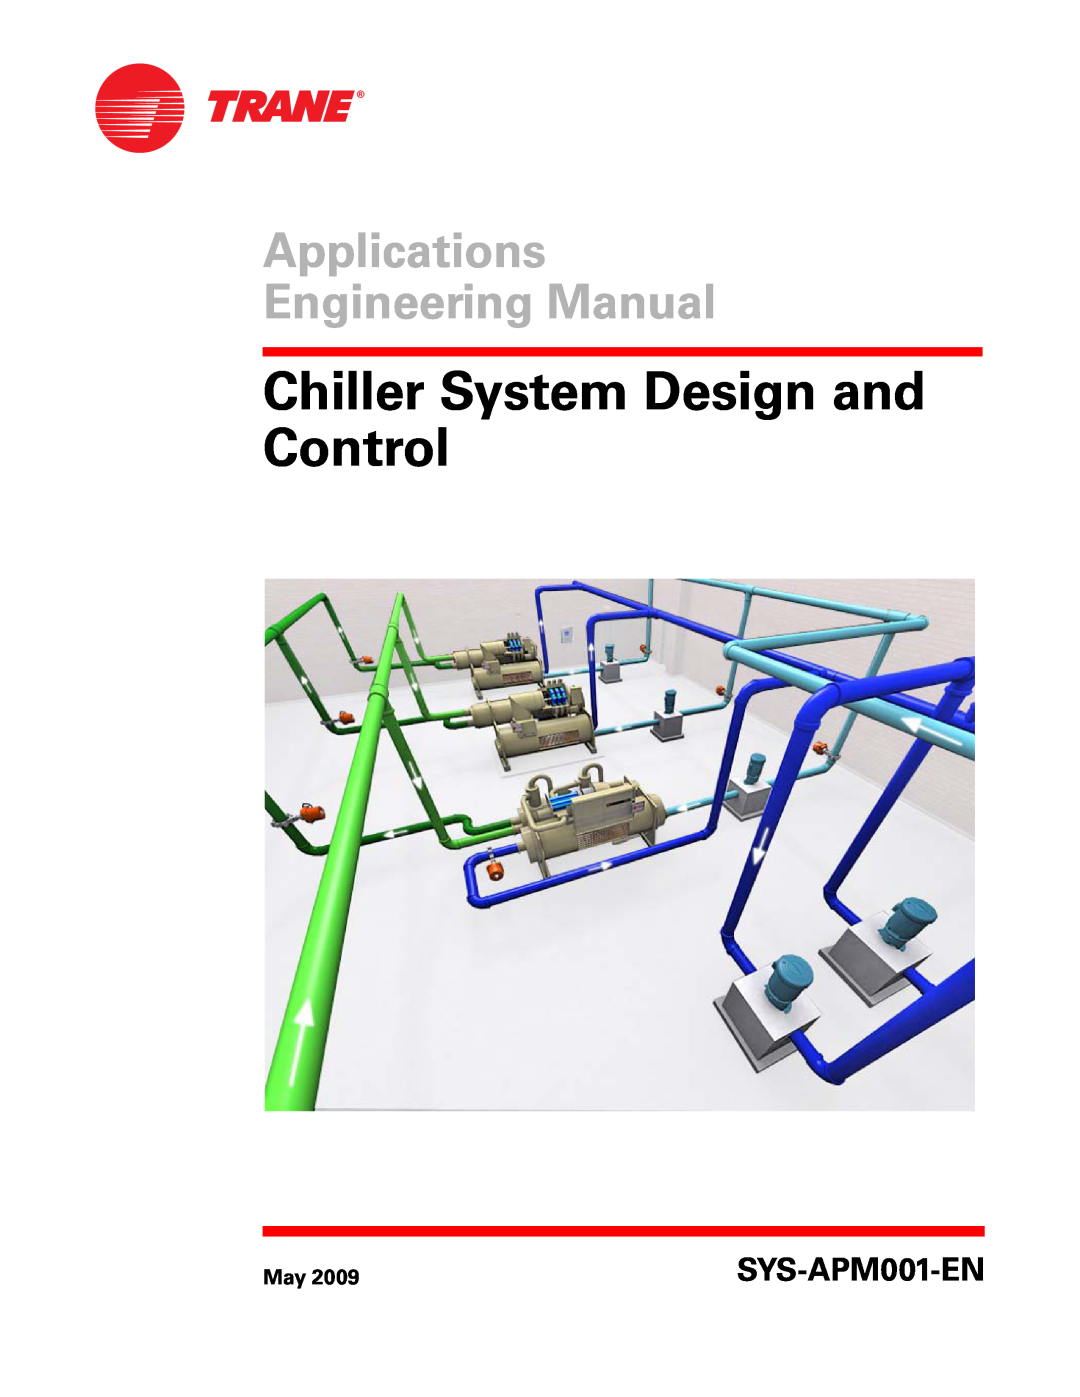 Trane SYS-APM001-EN manual Chiller System Design and Control, Applications Engineering Manual 